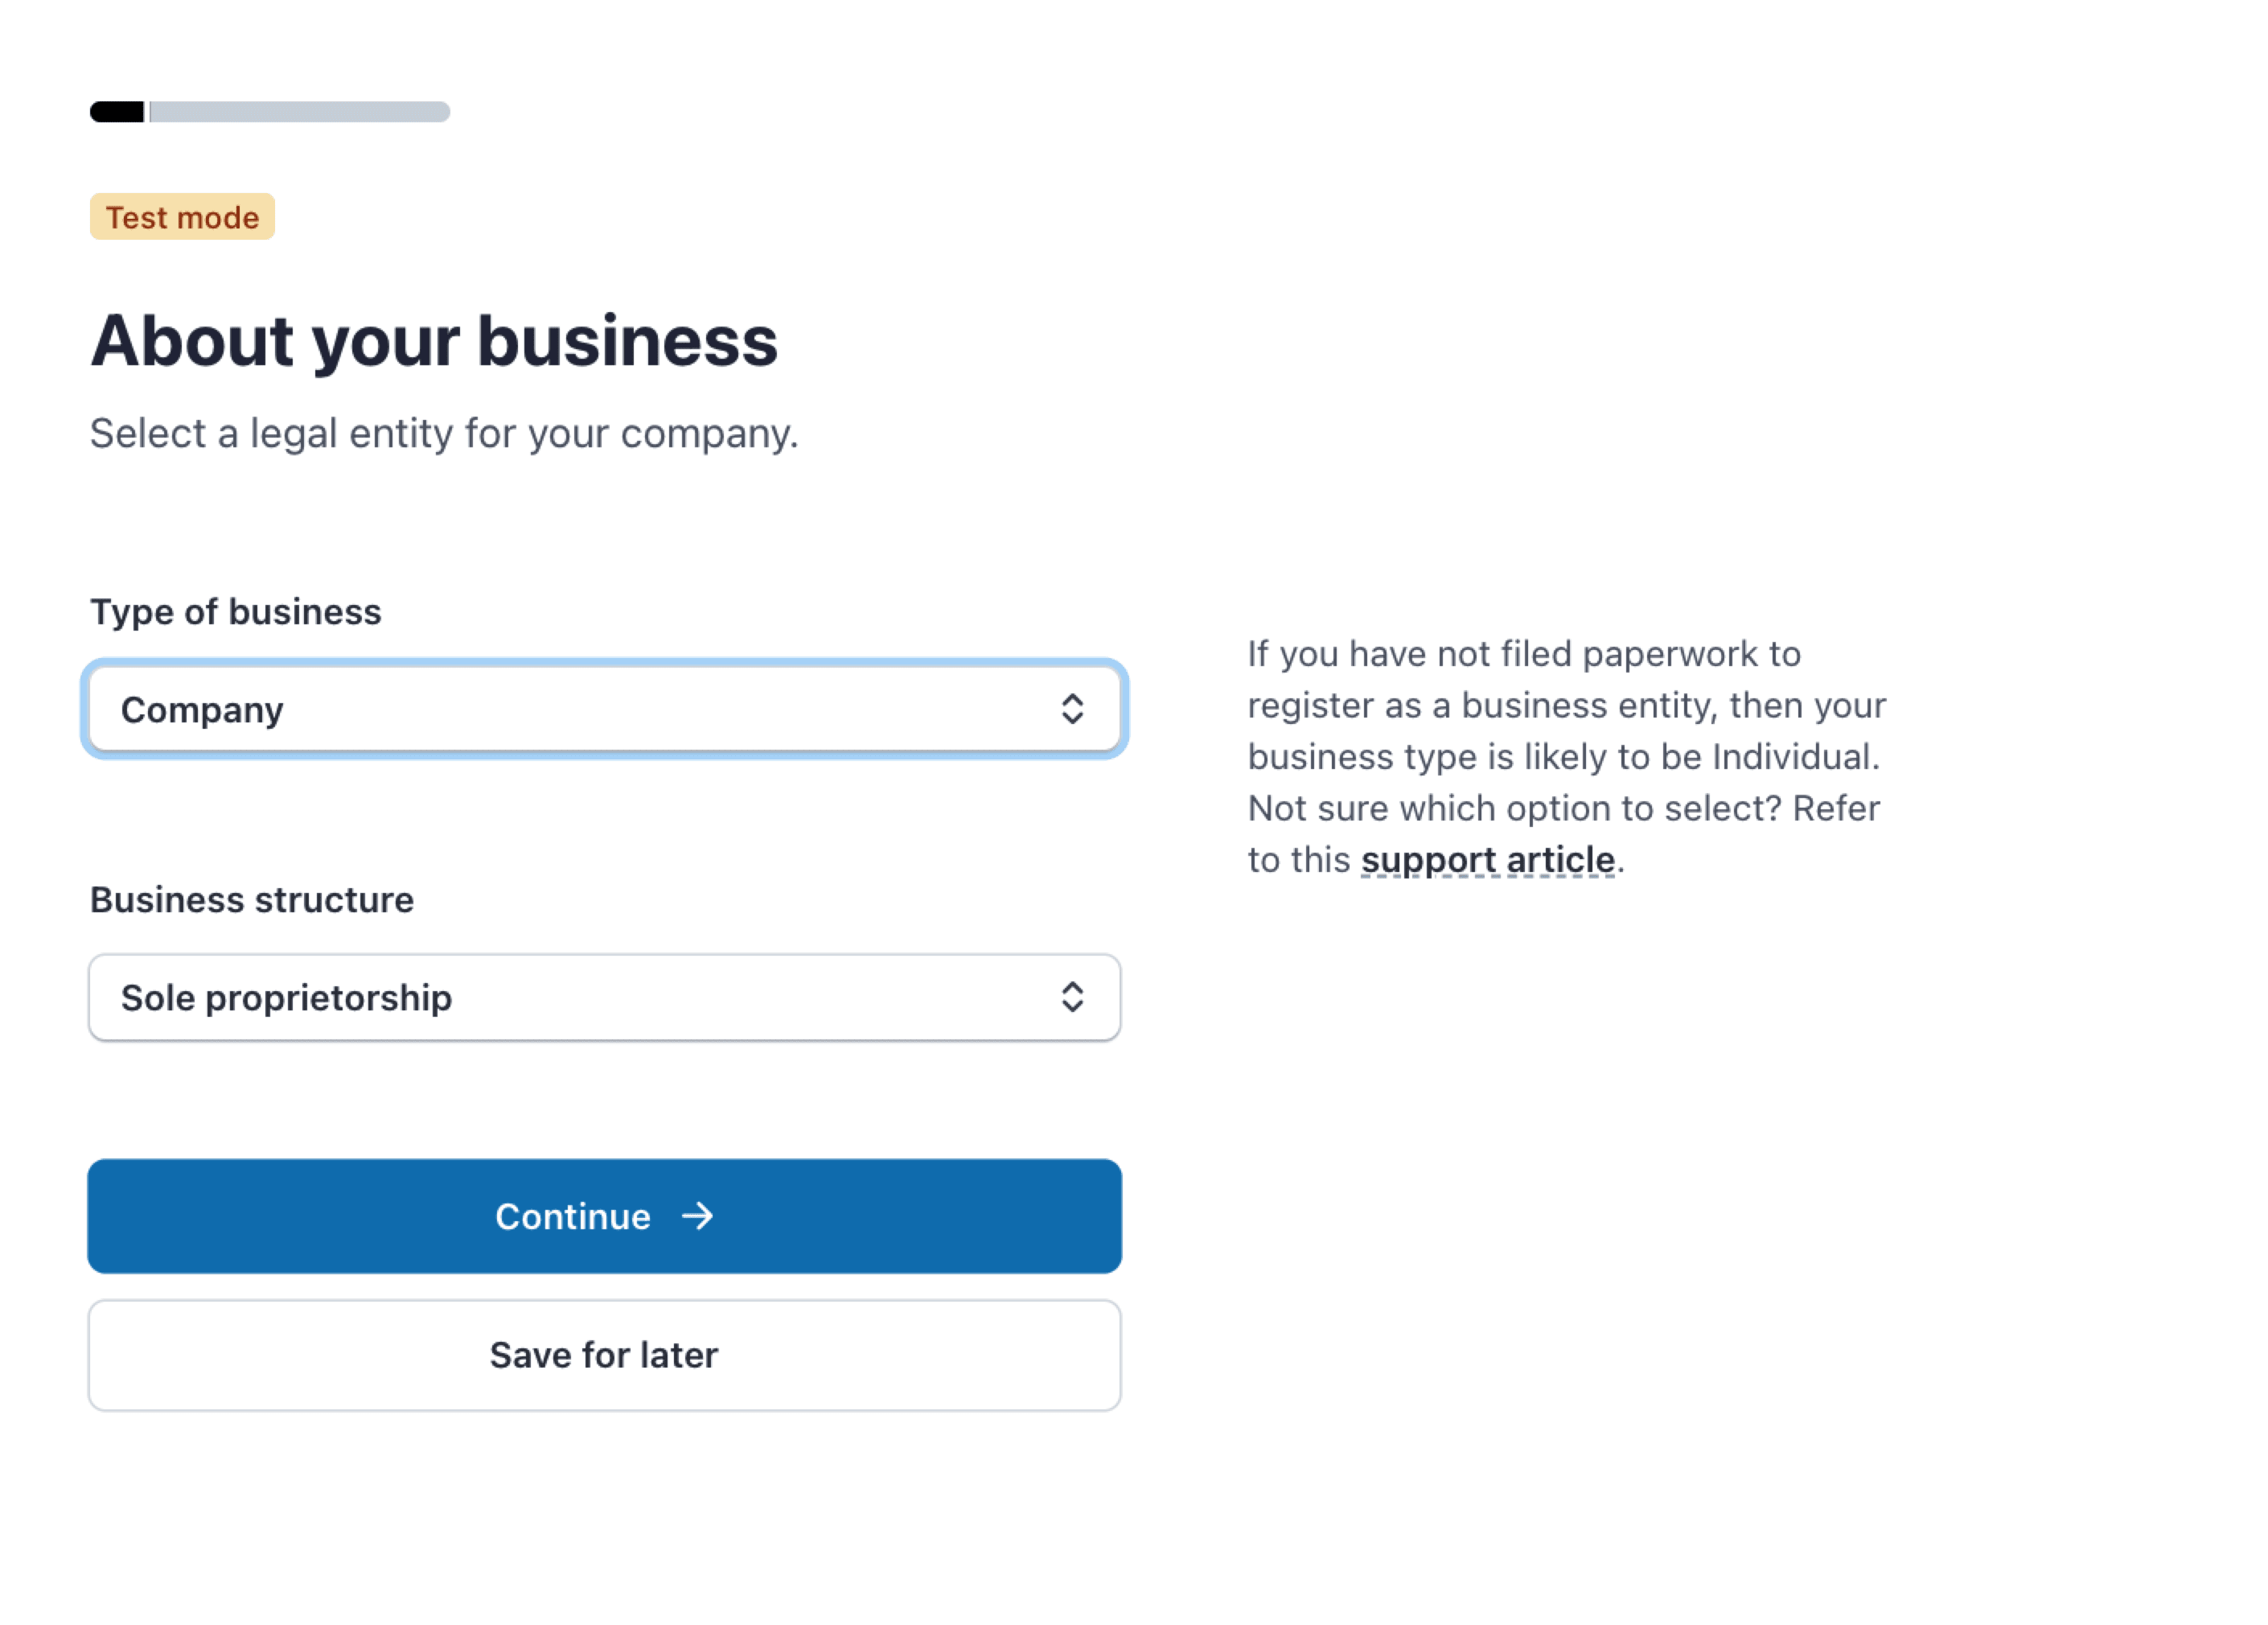 About your business page